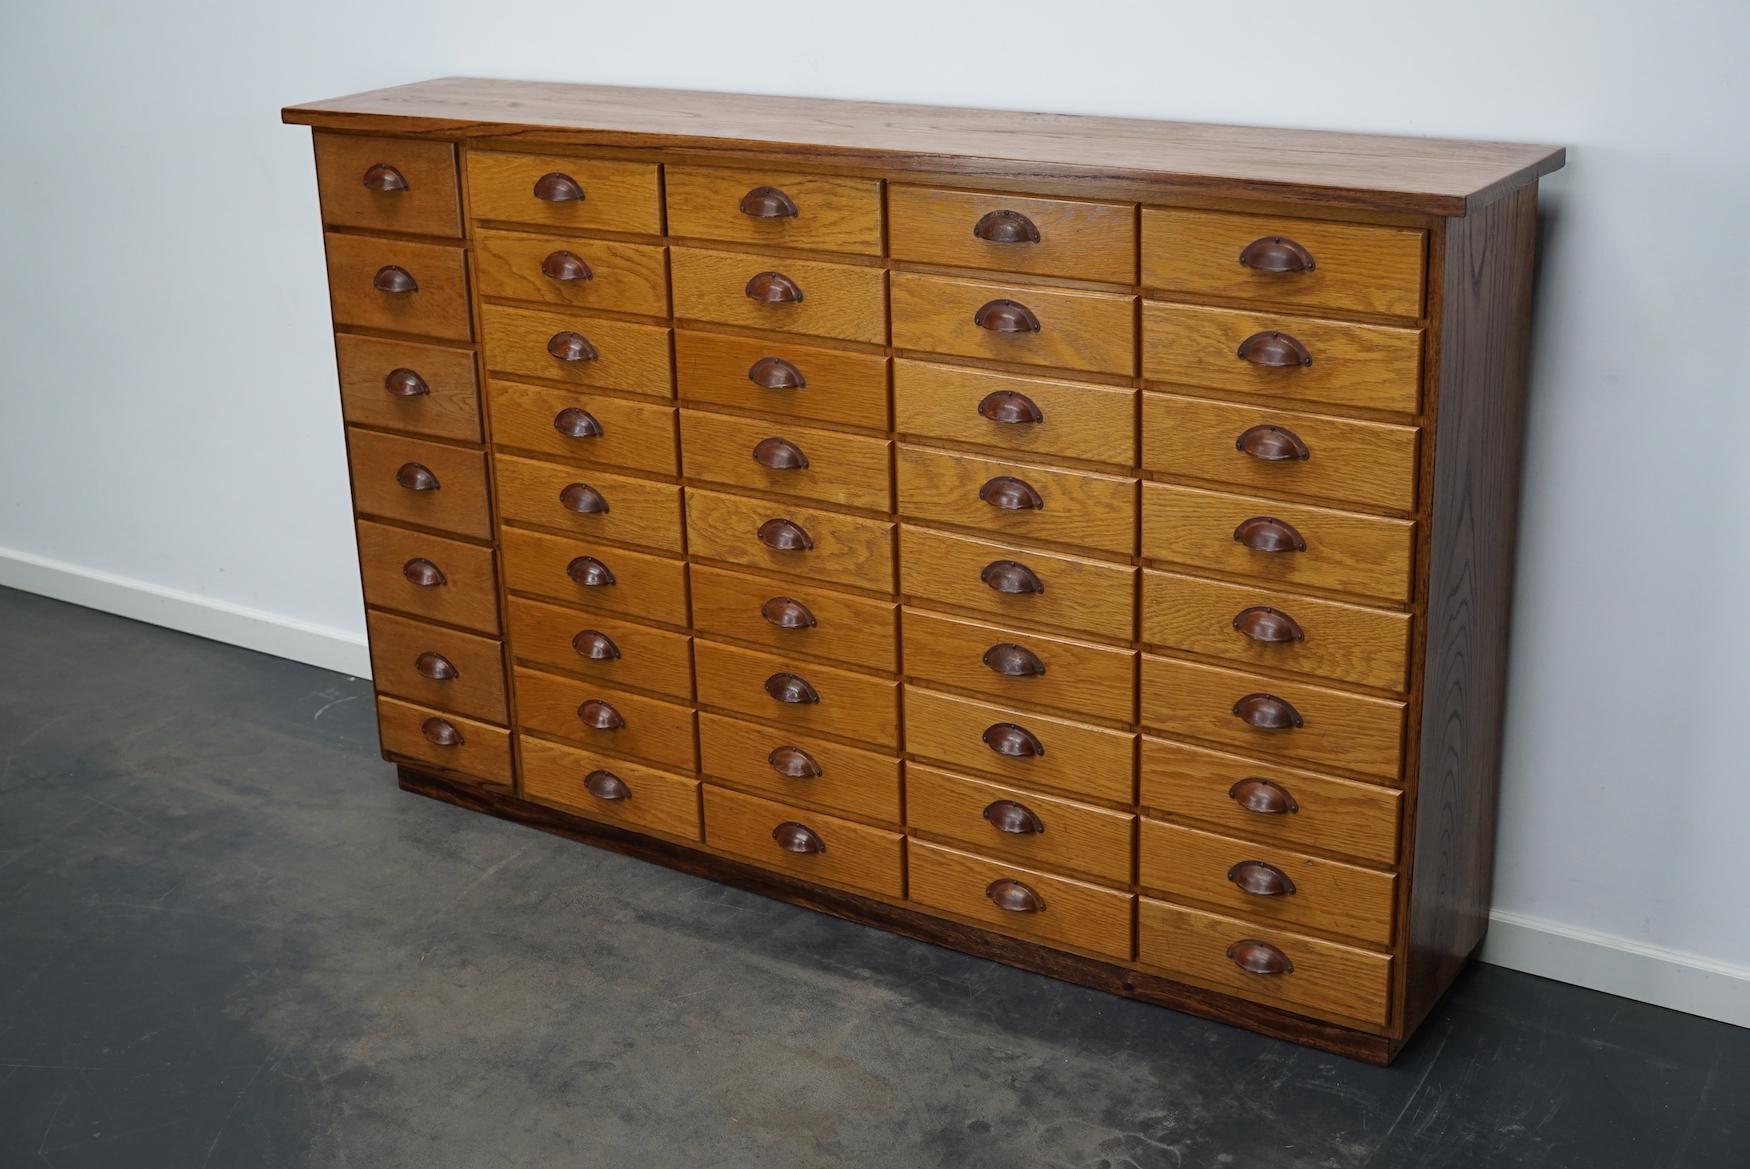 This apothecary cabinet was made from oak circa 1940 / 1950s in Germany. It features 43 drawers with nice metal handles. The interior dimensions of the drawers are: DWH 26 x 27 x 7 cm and 26 x 22 x 10 cm.